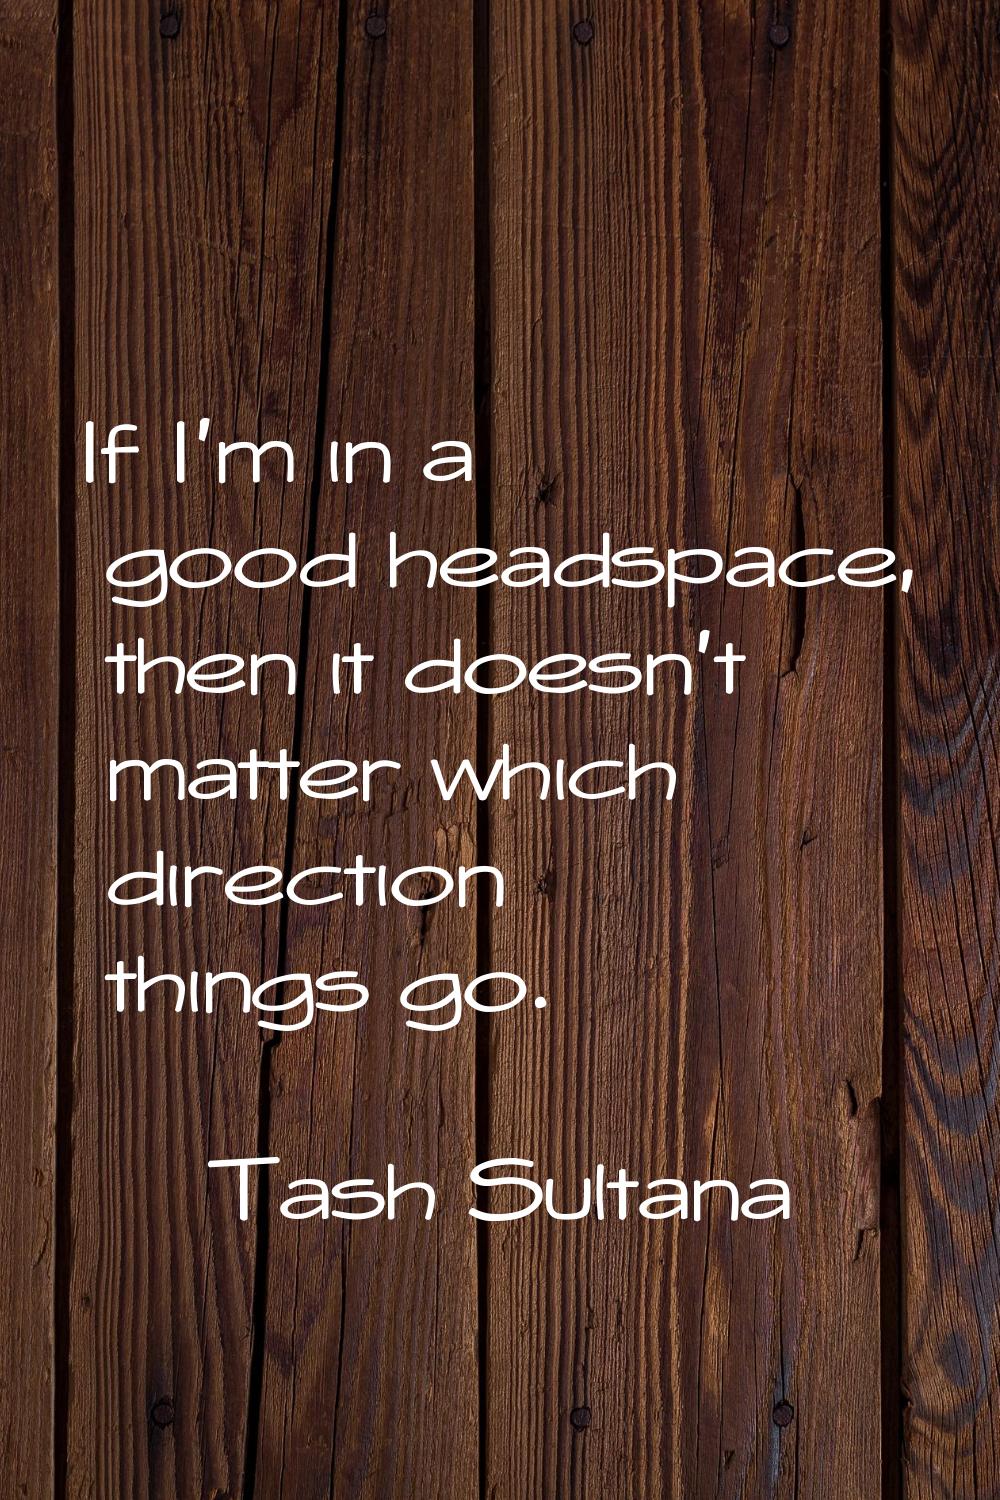 If I'm in a good headspace, then it doesn't matter which direction things go.